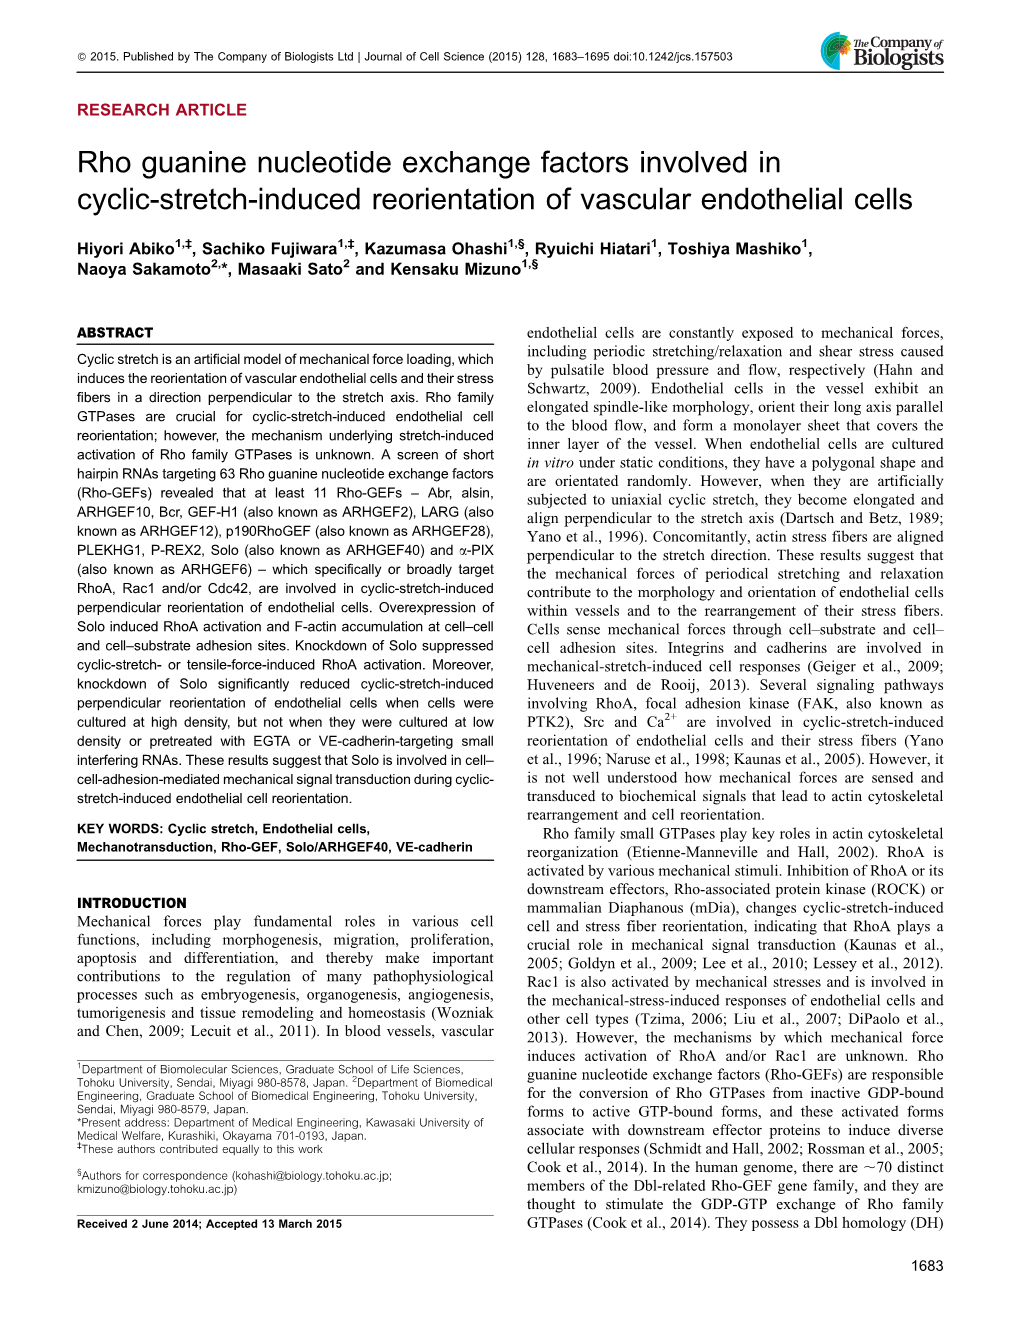 Rho Guanine Nucleotide Exchange Factors Involved in Cyclic-Stretch-Induced Reorientation of Vascular Endothelial Cells